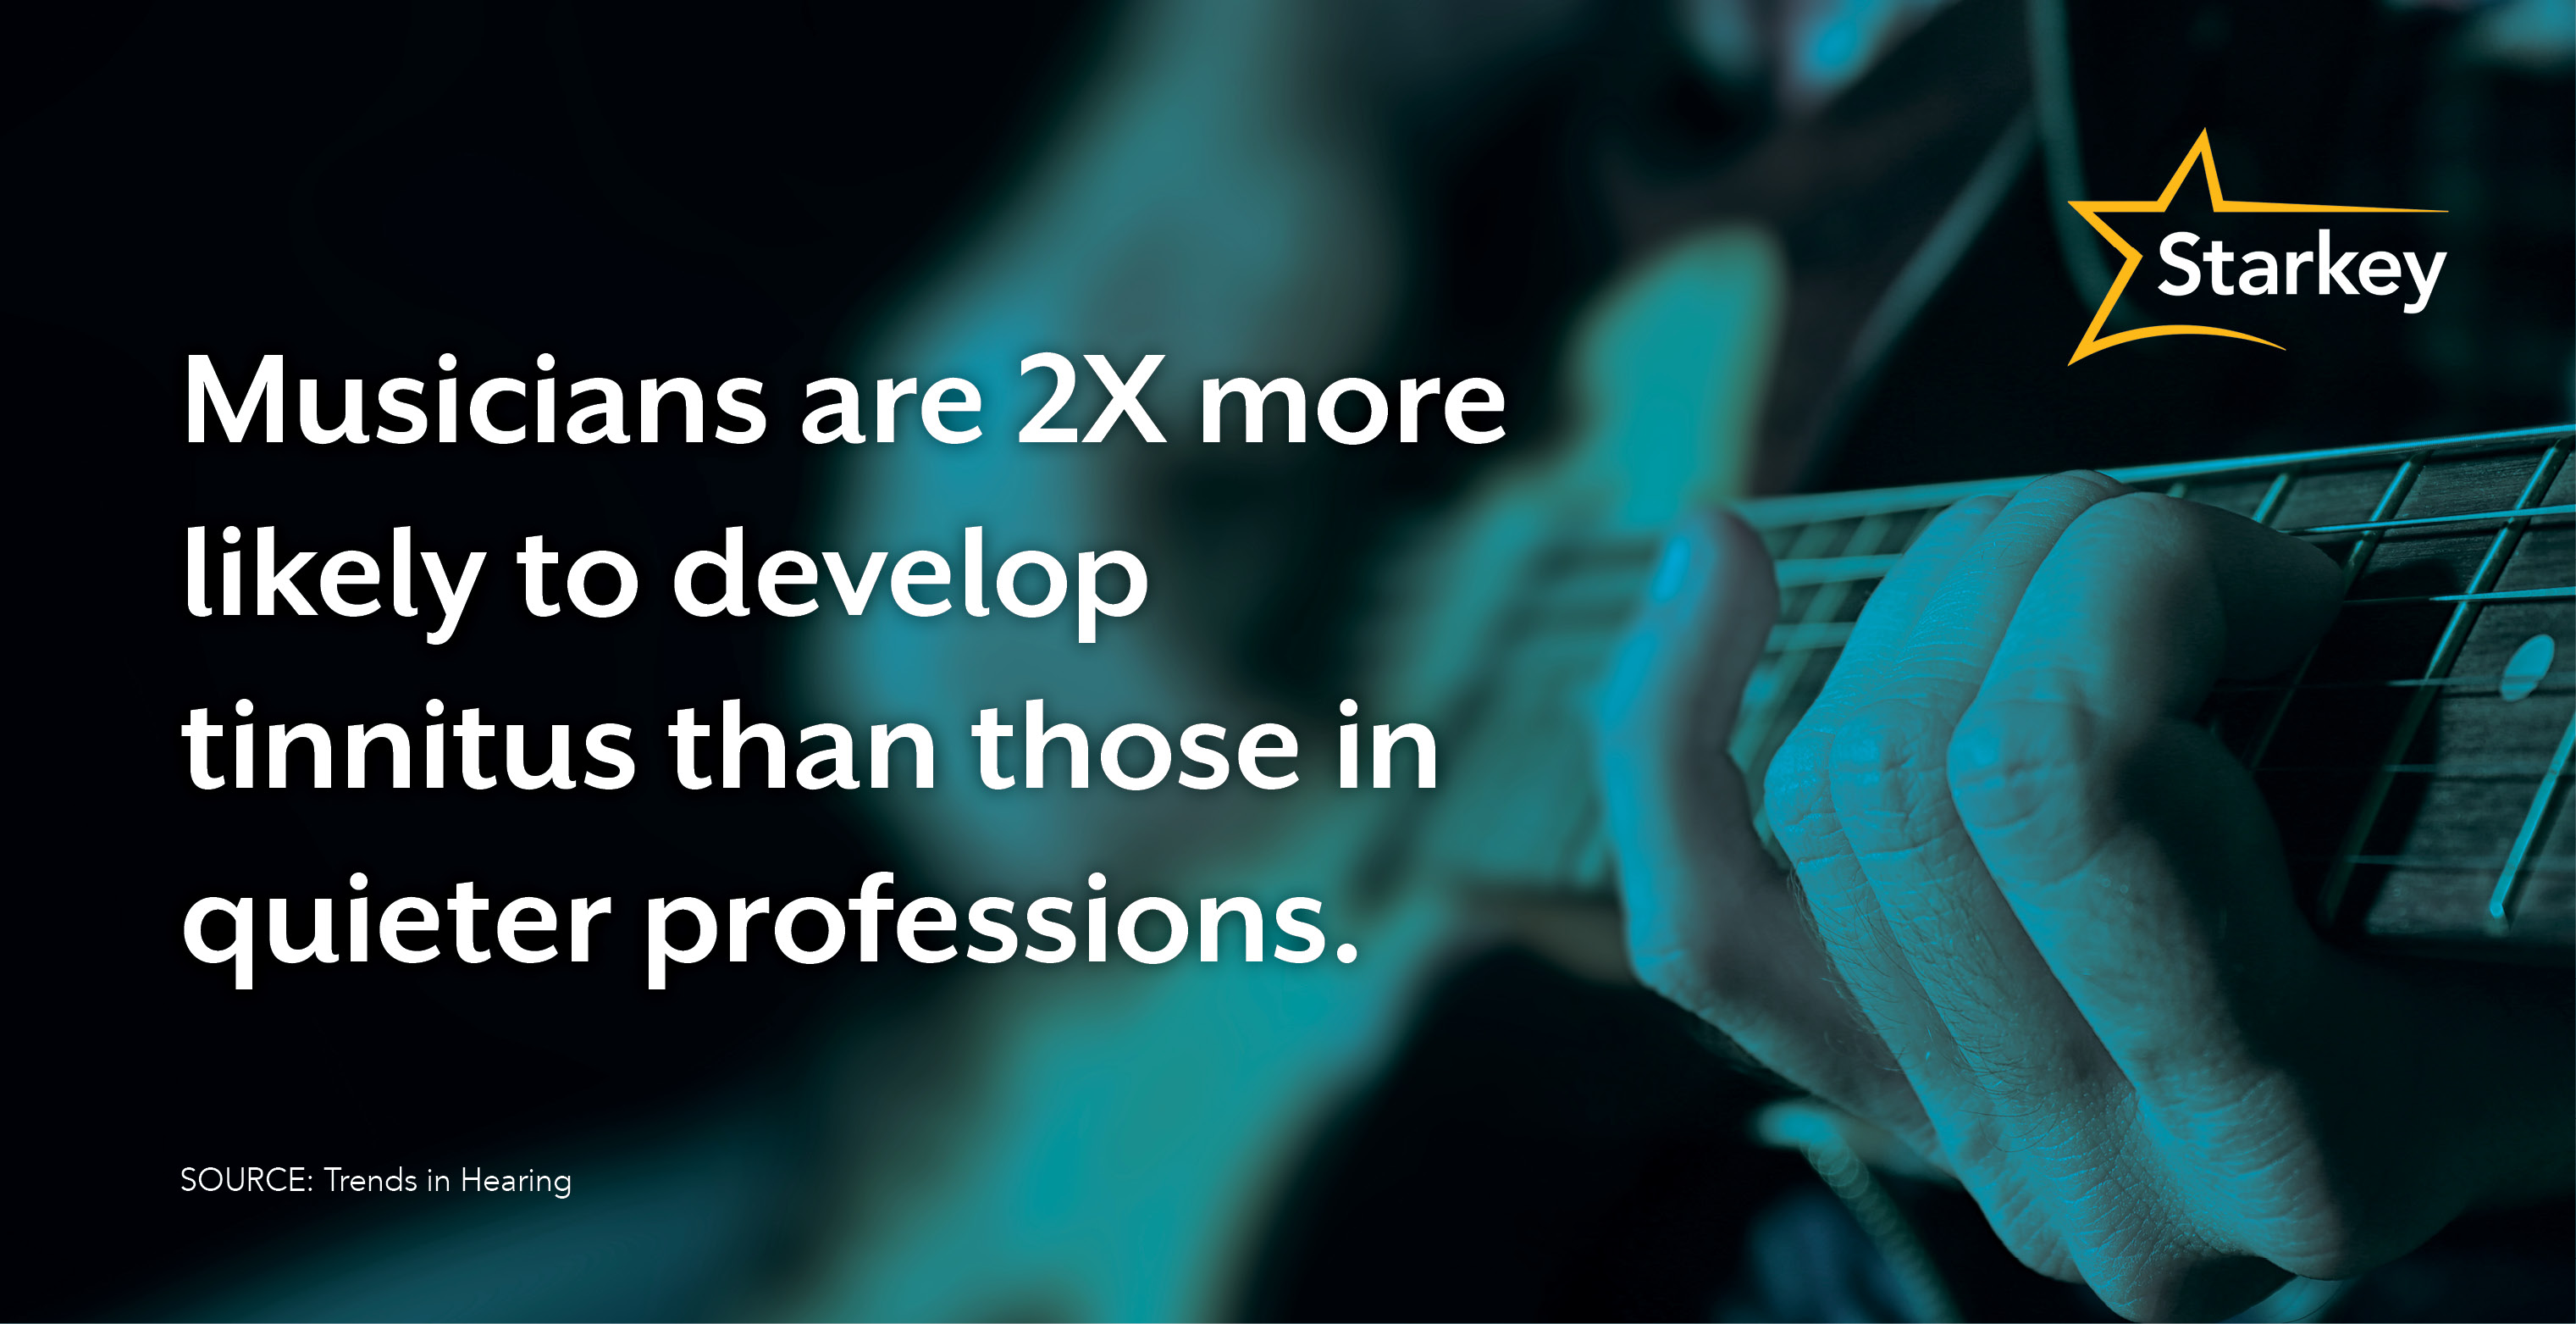 Image of hands playing guitar alongside text that reads "Musicians are 2X more likely to develop tinnitus than those in quieter professions."